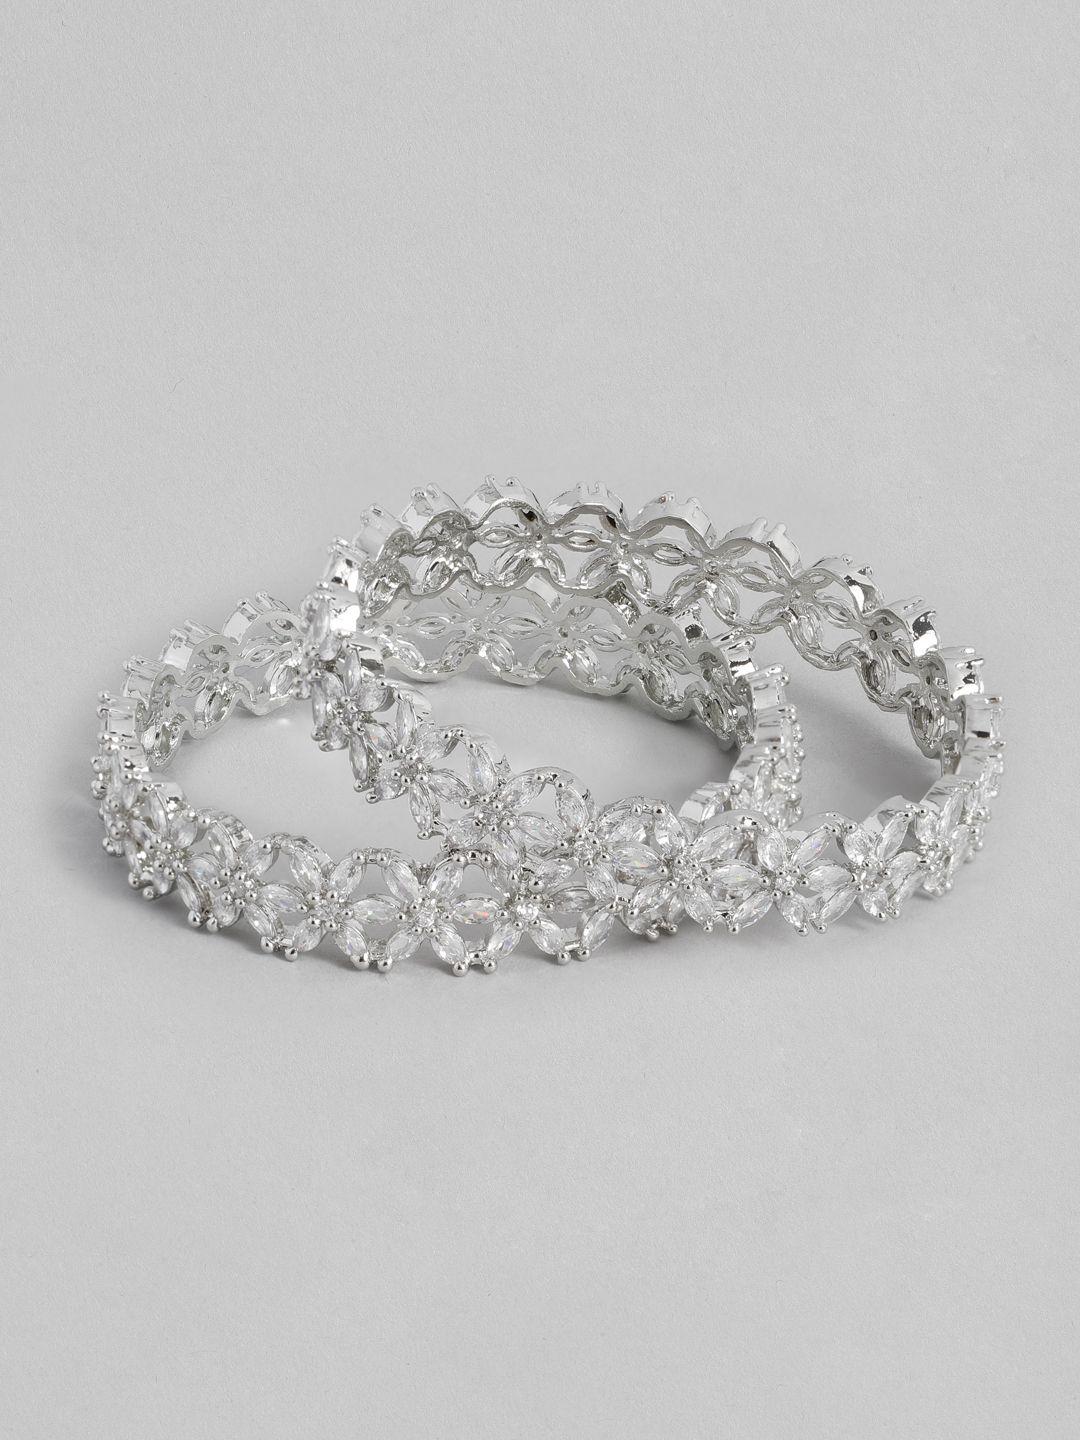 justpeachy set of 2 white rhodium-plated floral ad studded bangles